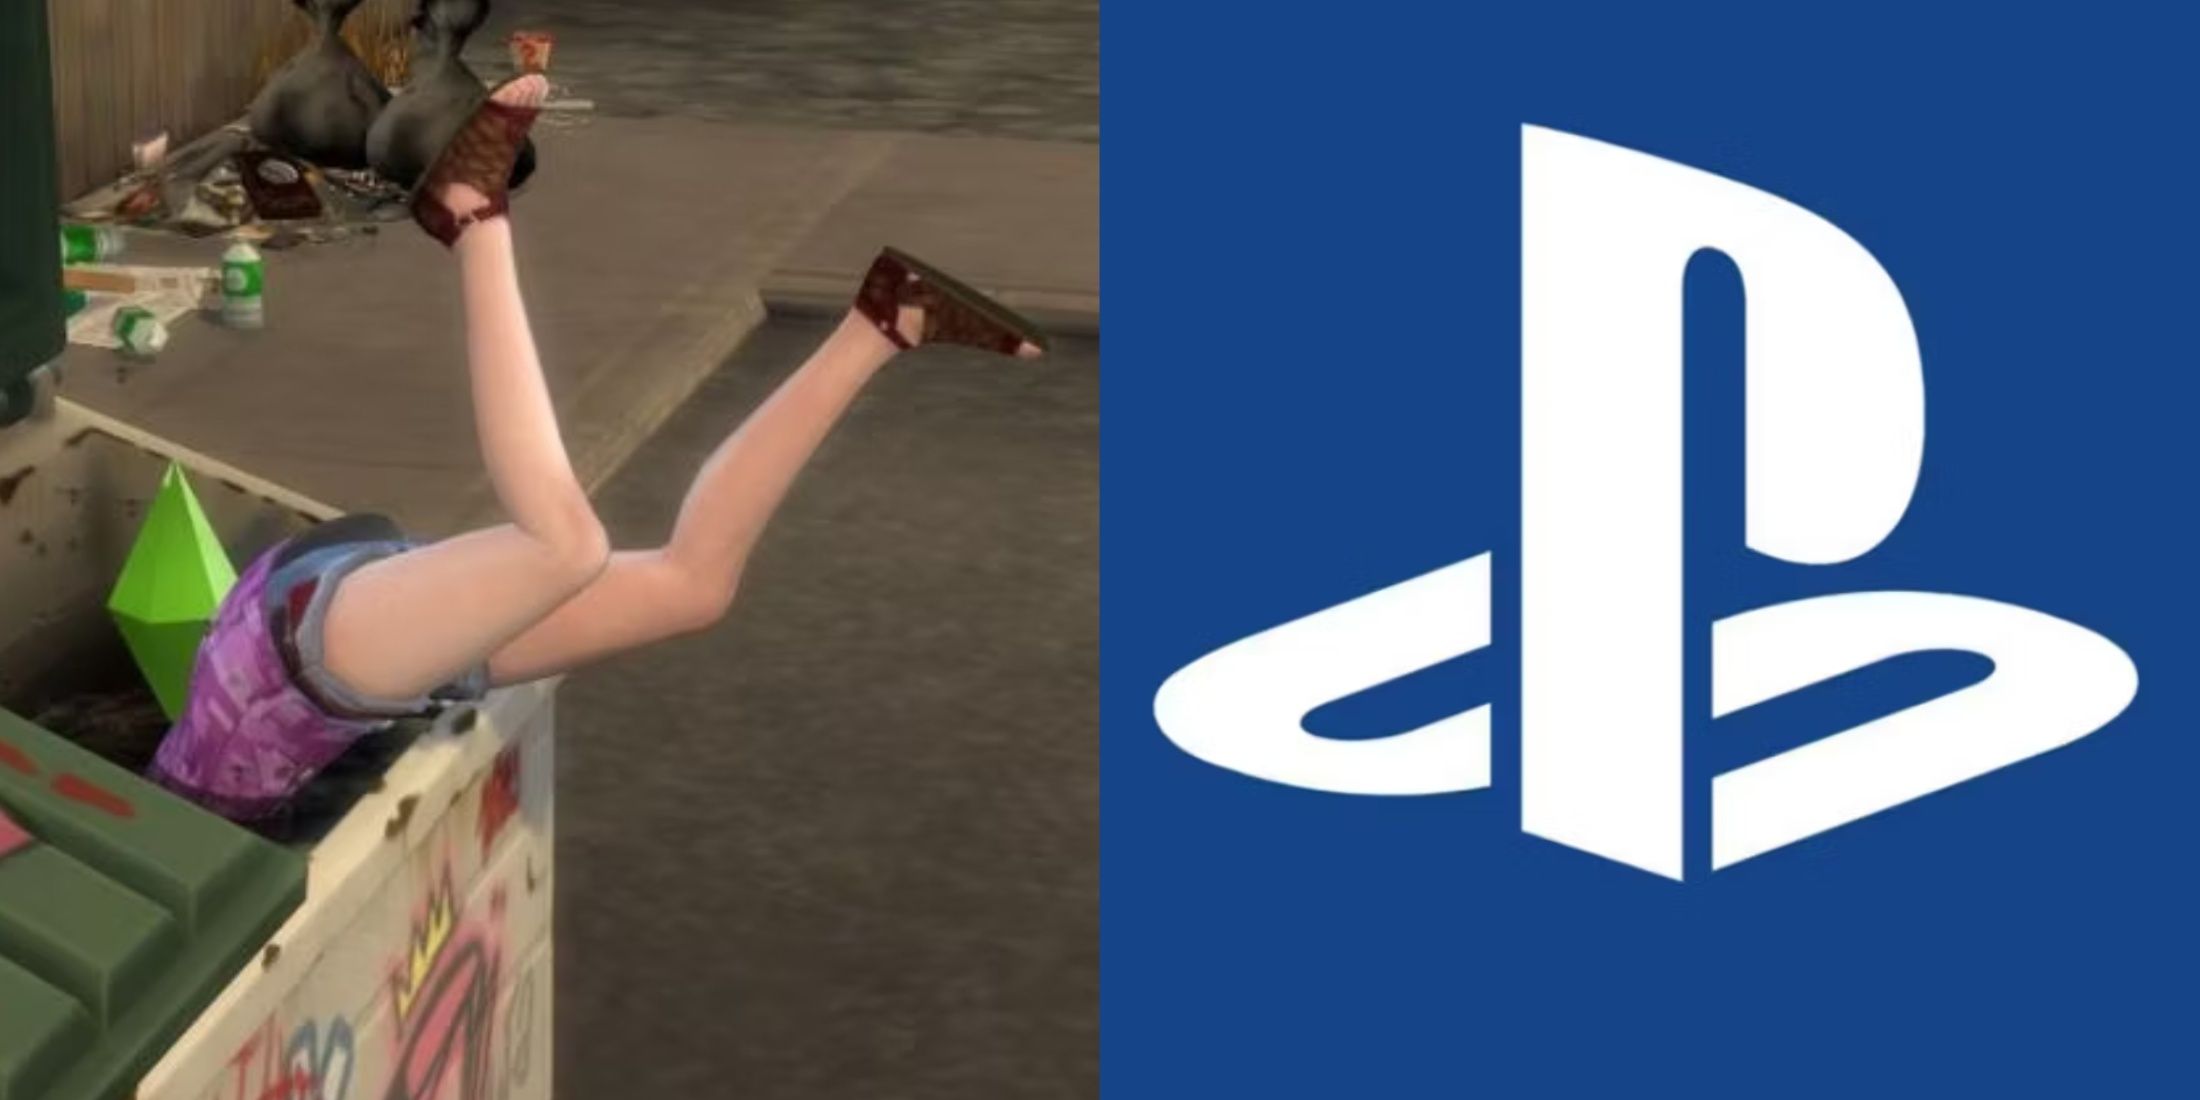 A Sims character dumpster diving next to the PlayStation logo